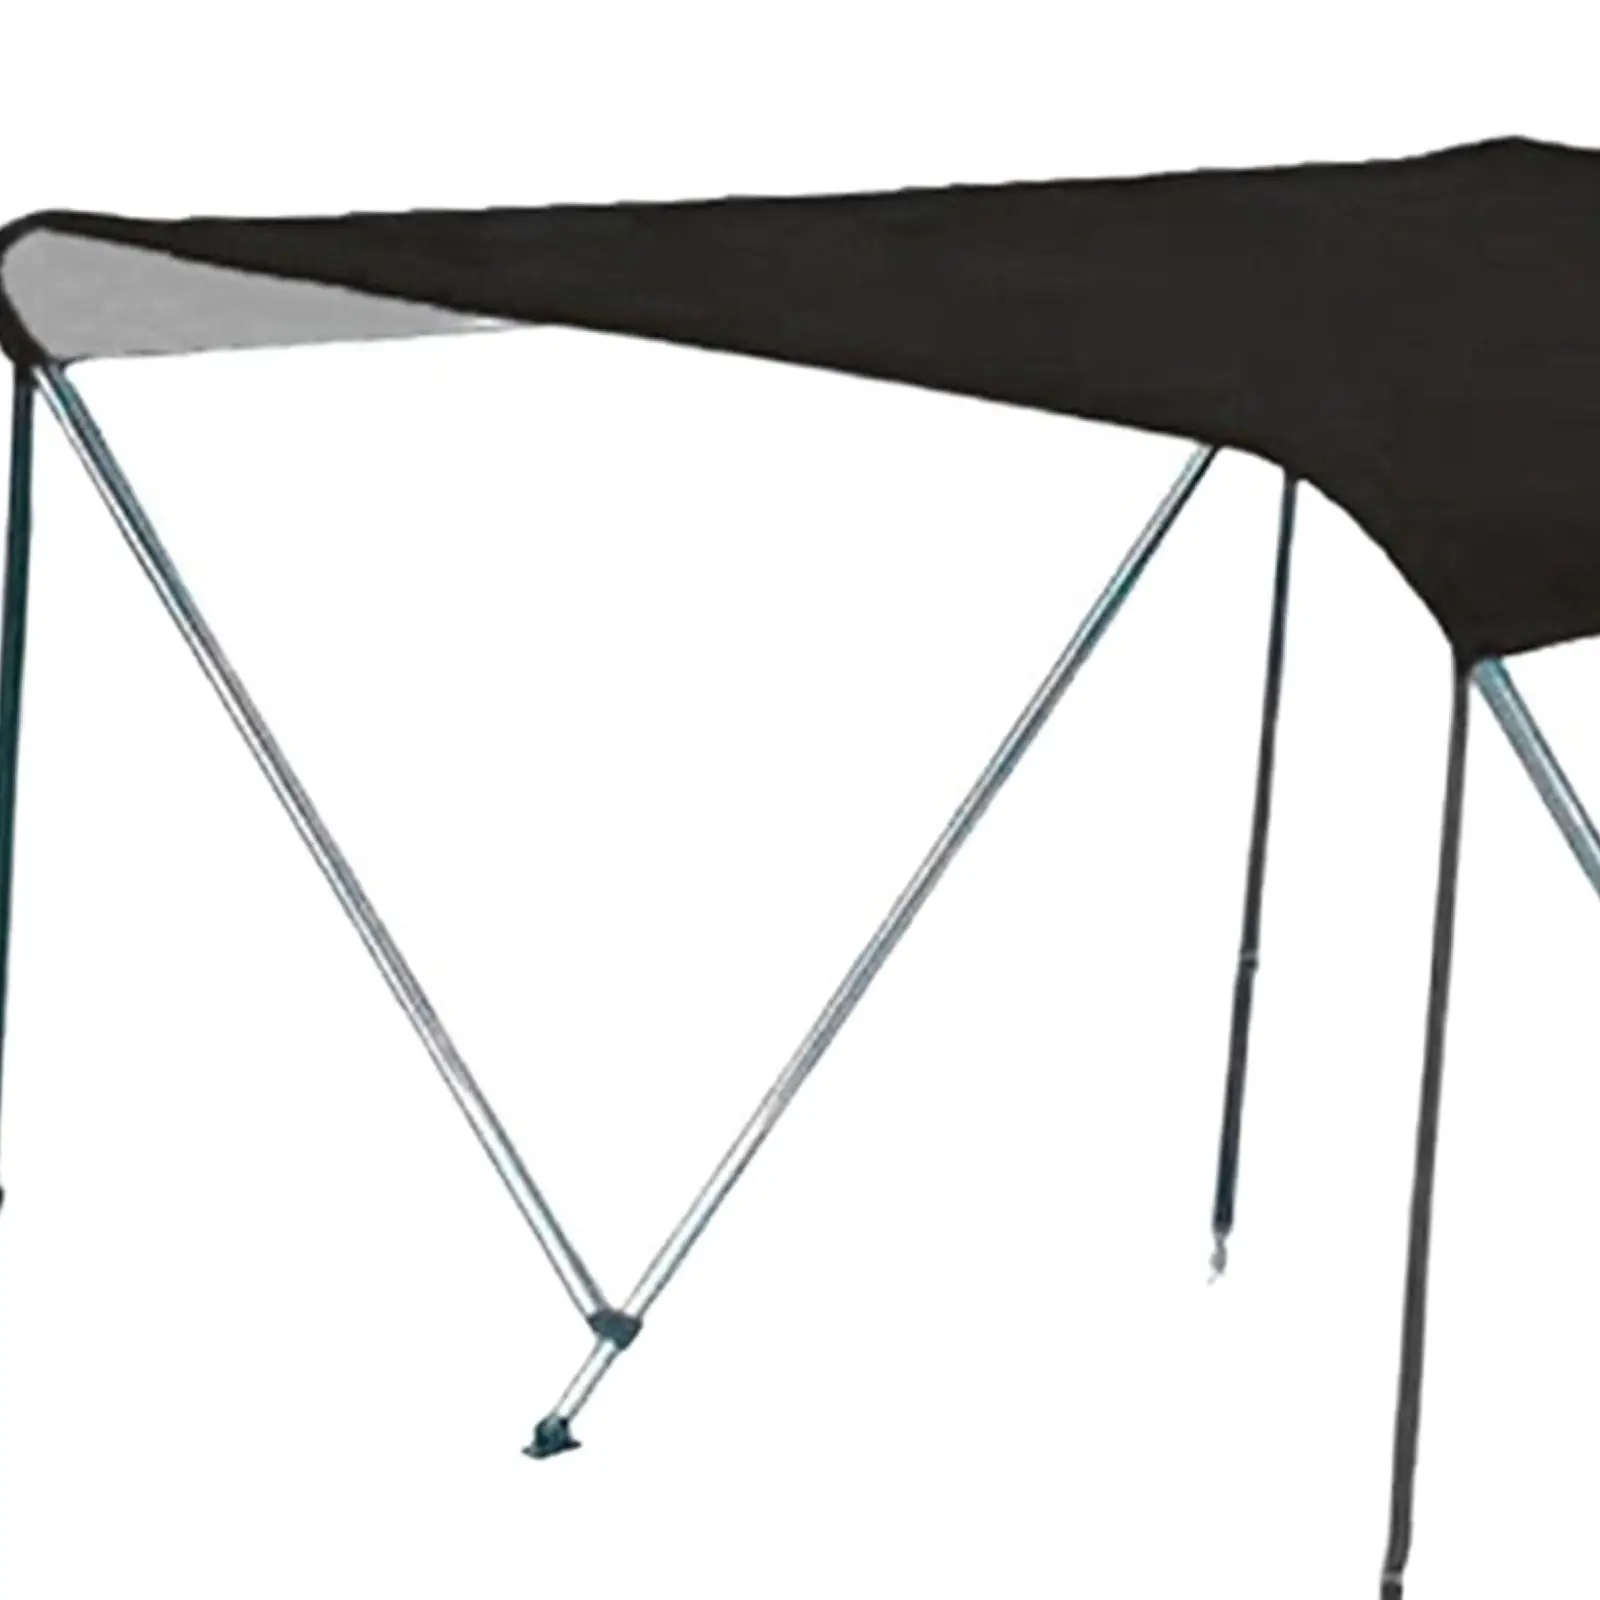 Boat Bimini Top Cover, Boat Awning with Adjustable Strap Foldable with Carabiner